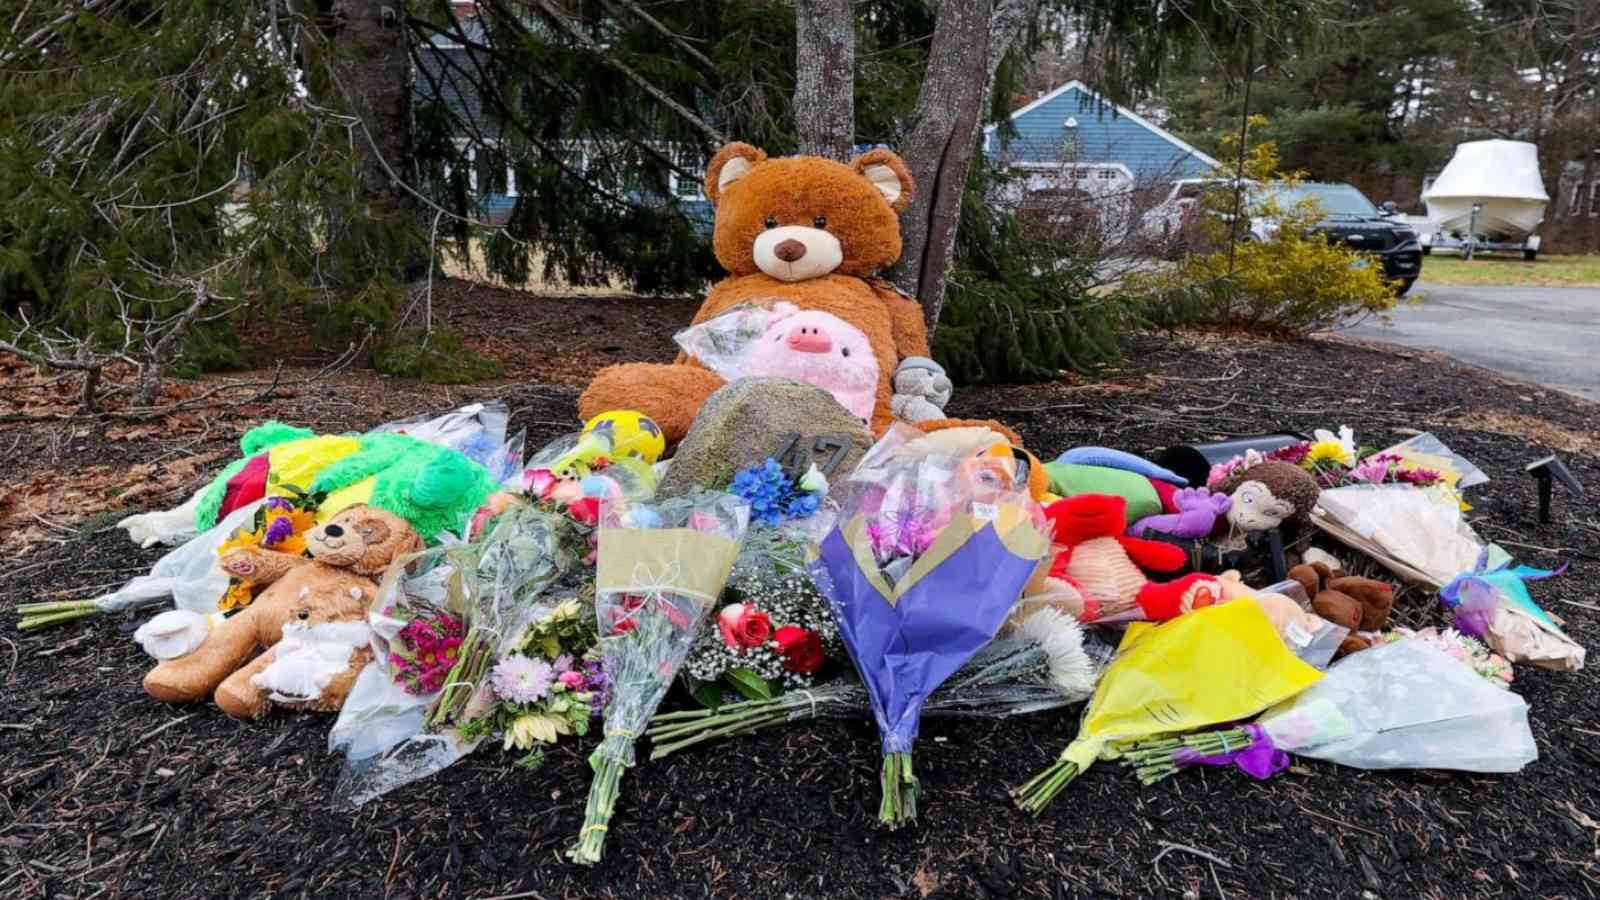 Mother Accused of Killing three children, Constructed Snowman with them Before Murders